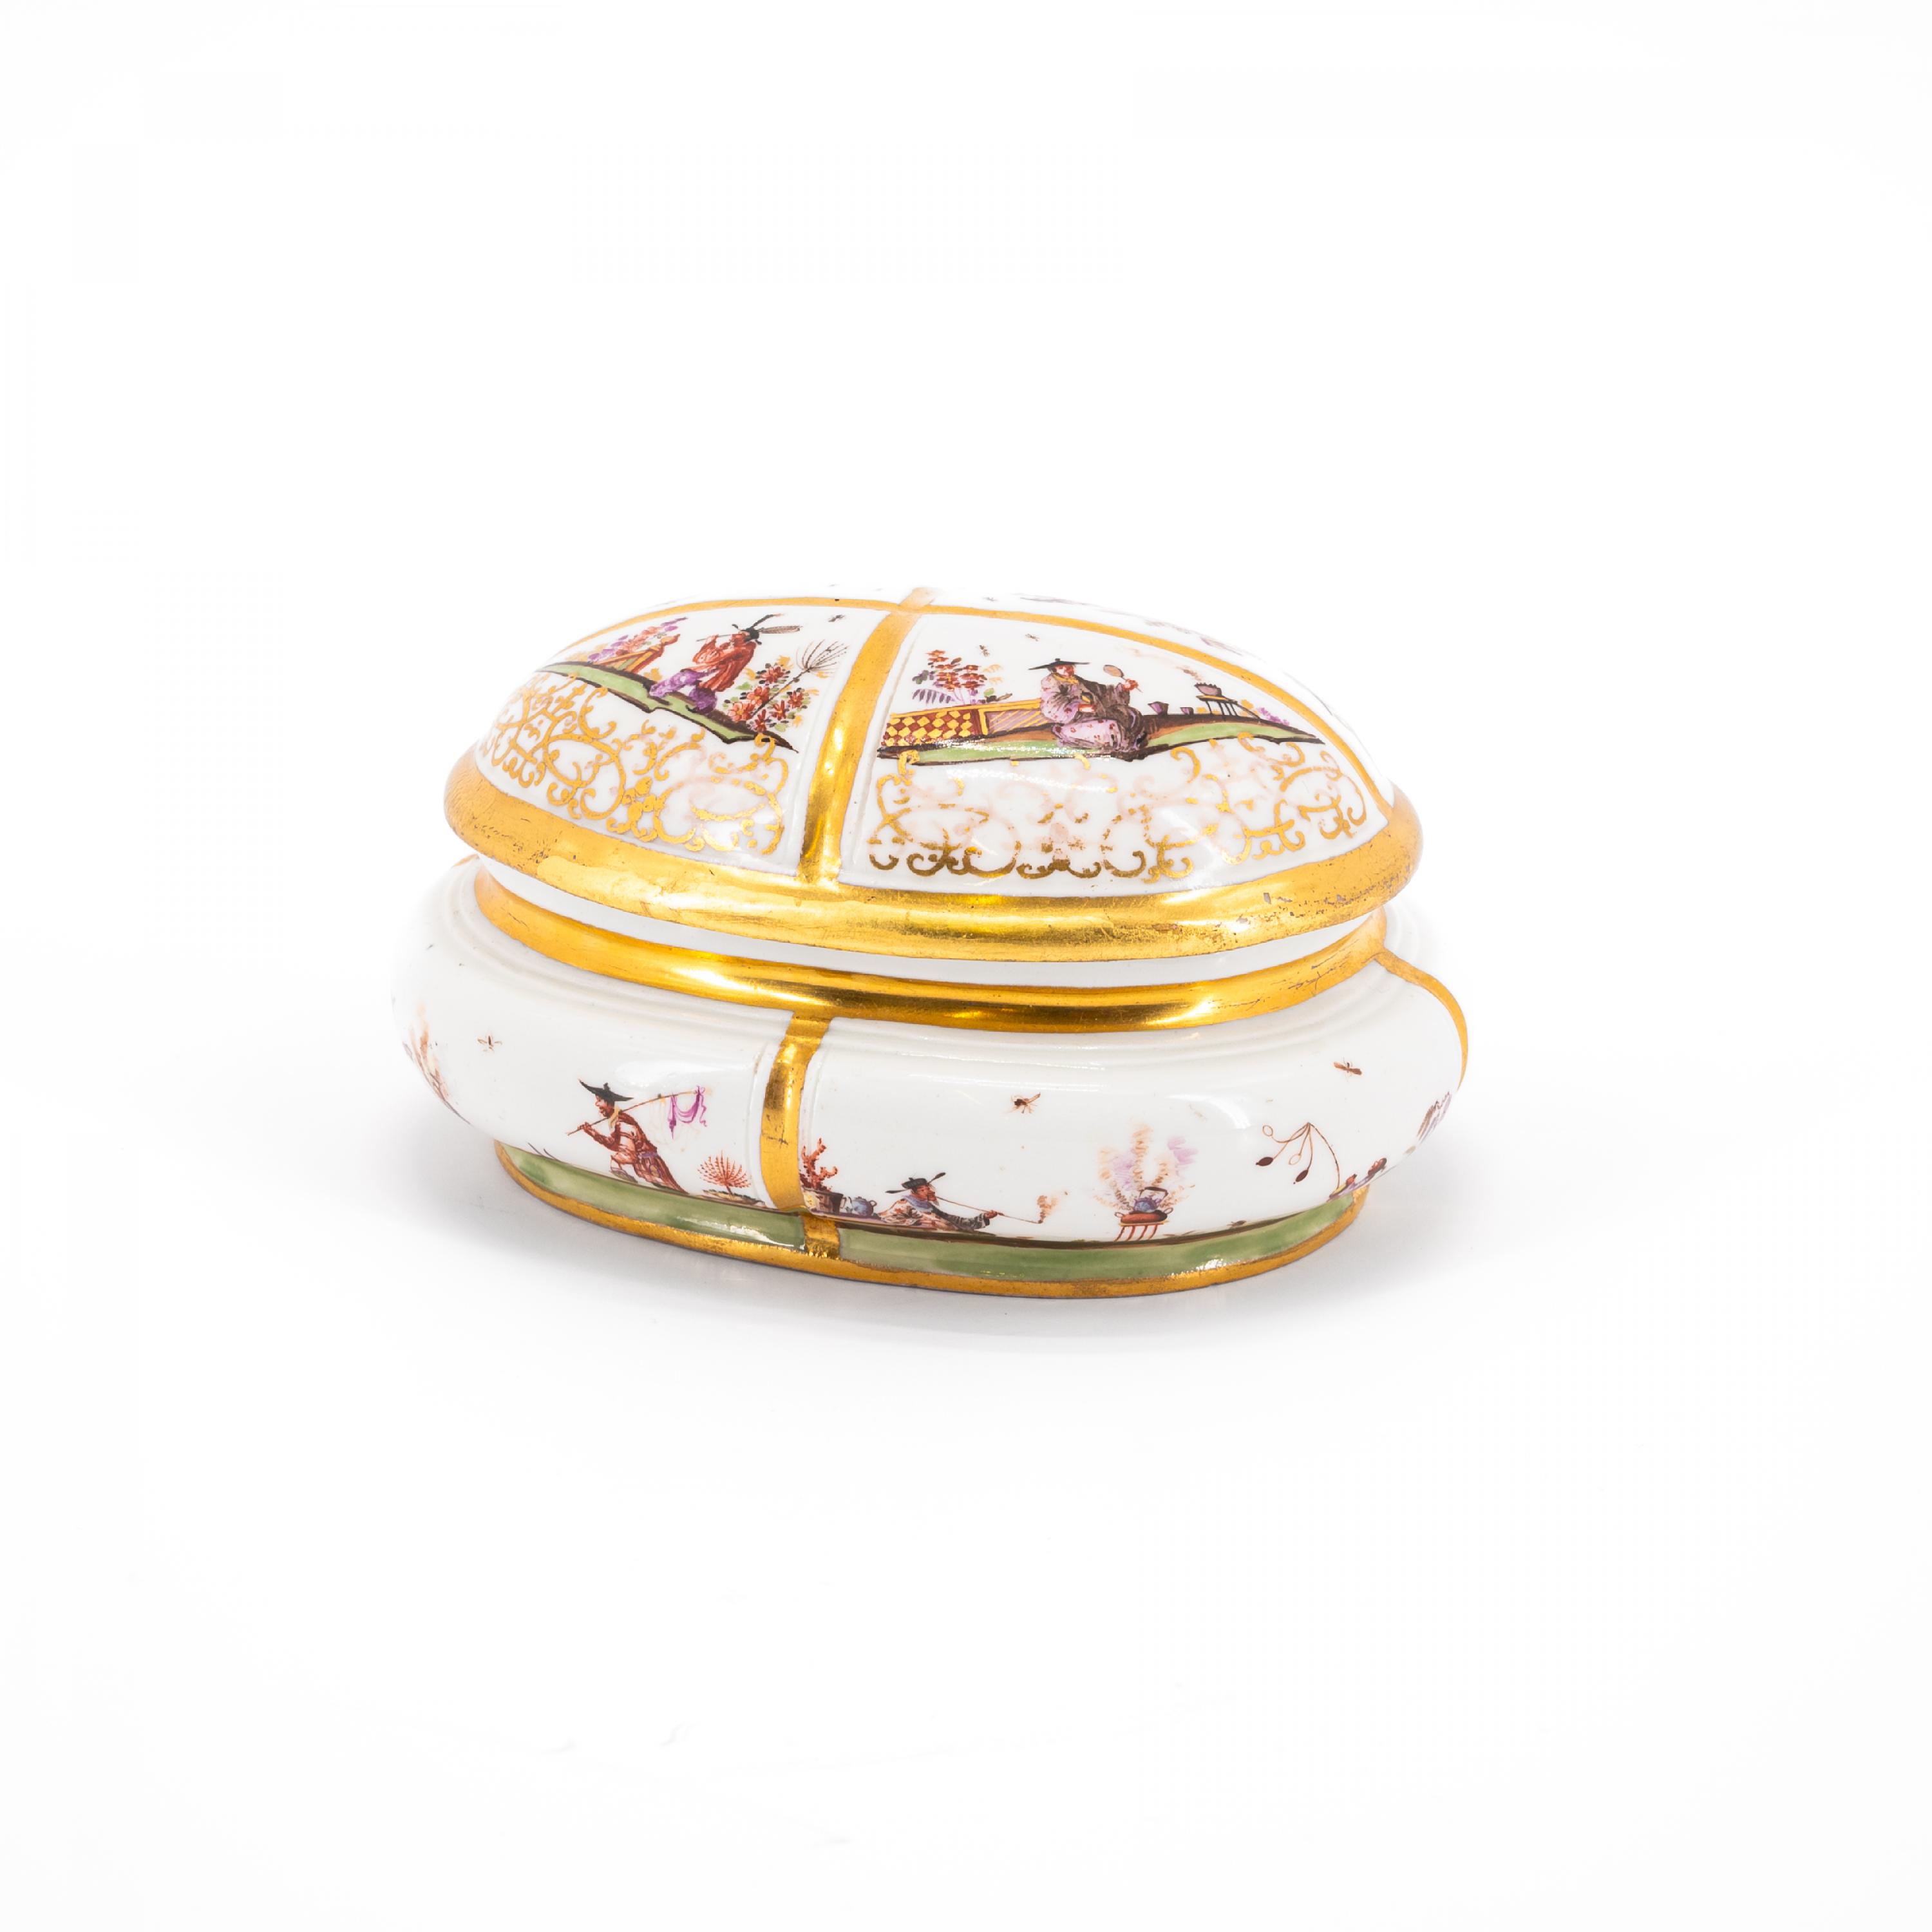 OVAL PORCELAIN SUGAR BOWL WITH CHINOISERIES - Image 2 of 7